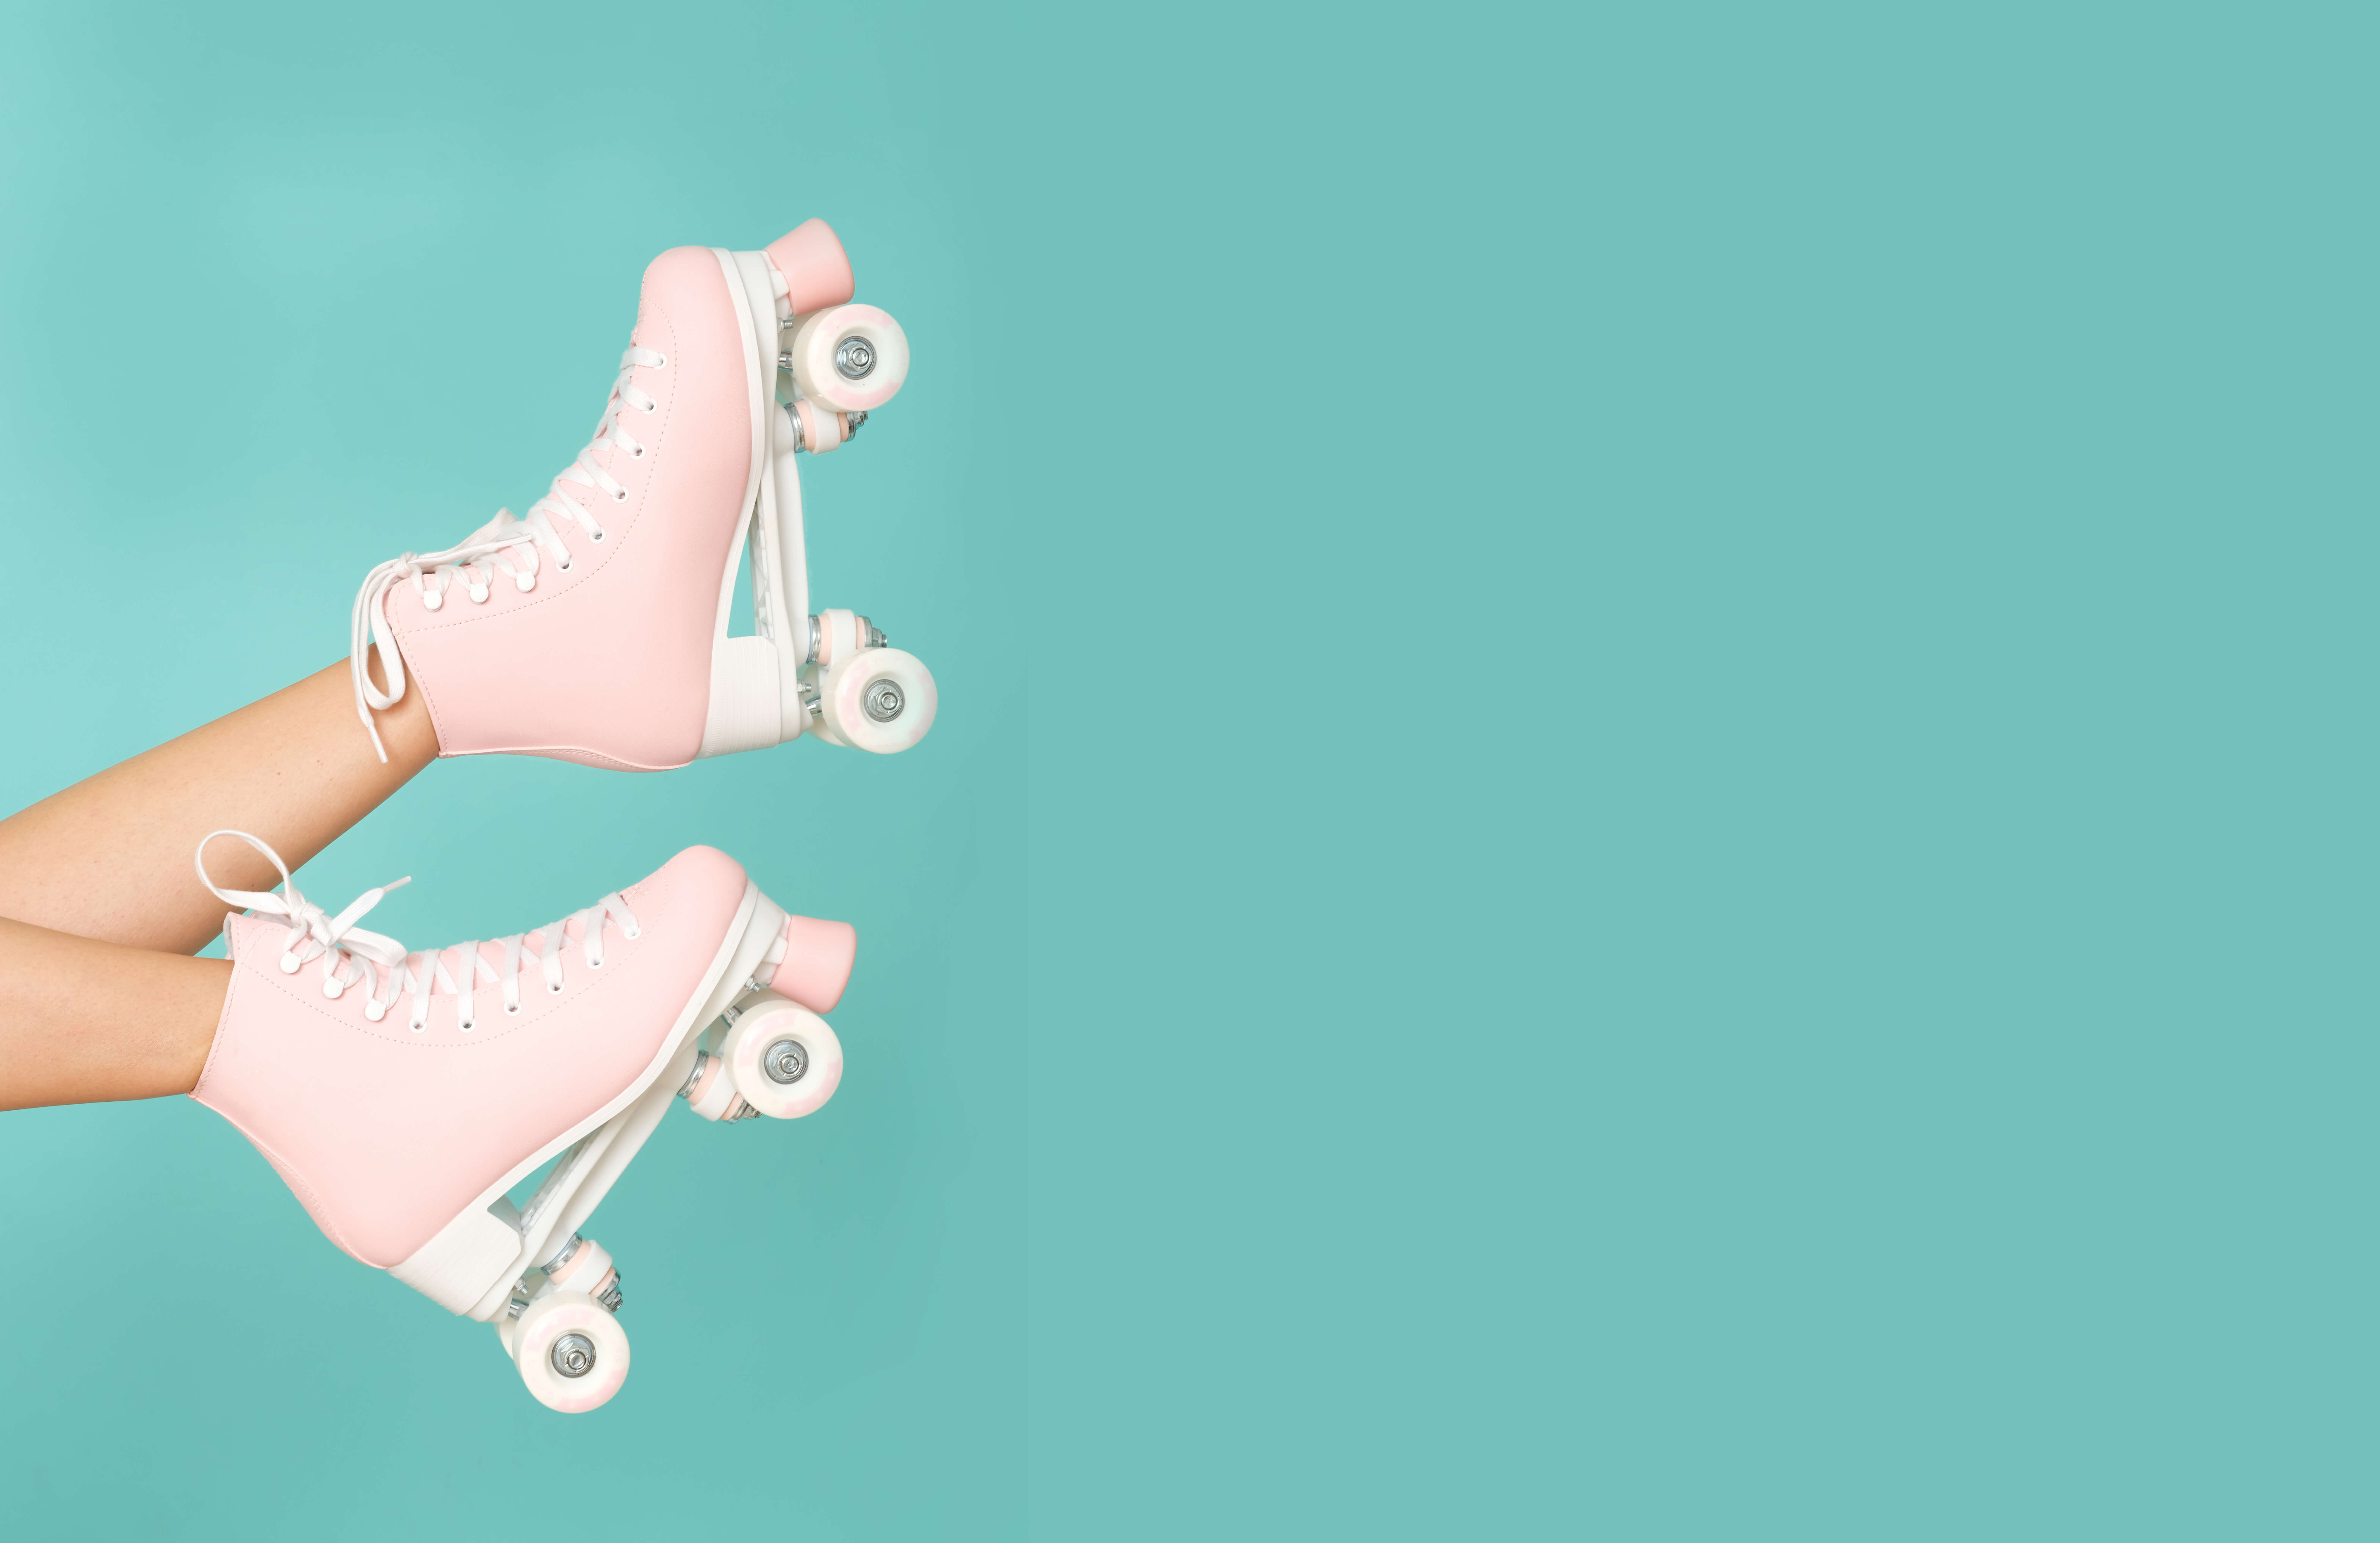 The Best Roller Skating Rinks in and around NYC